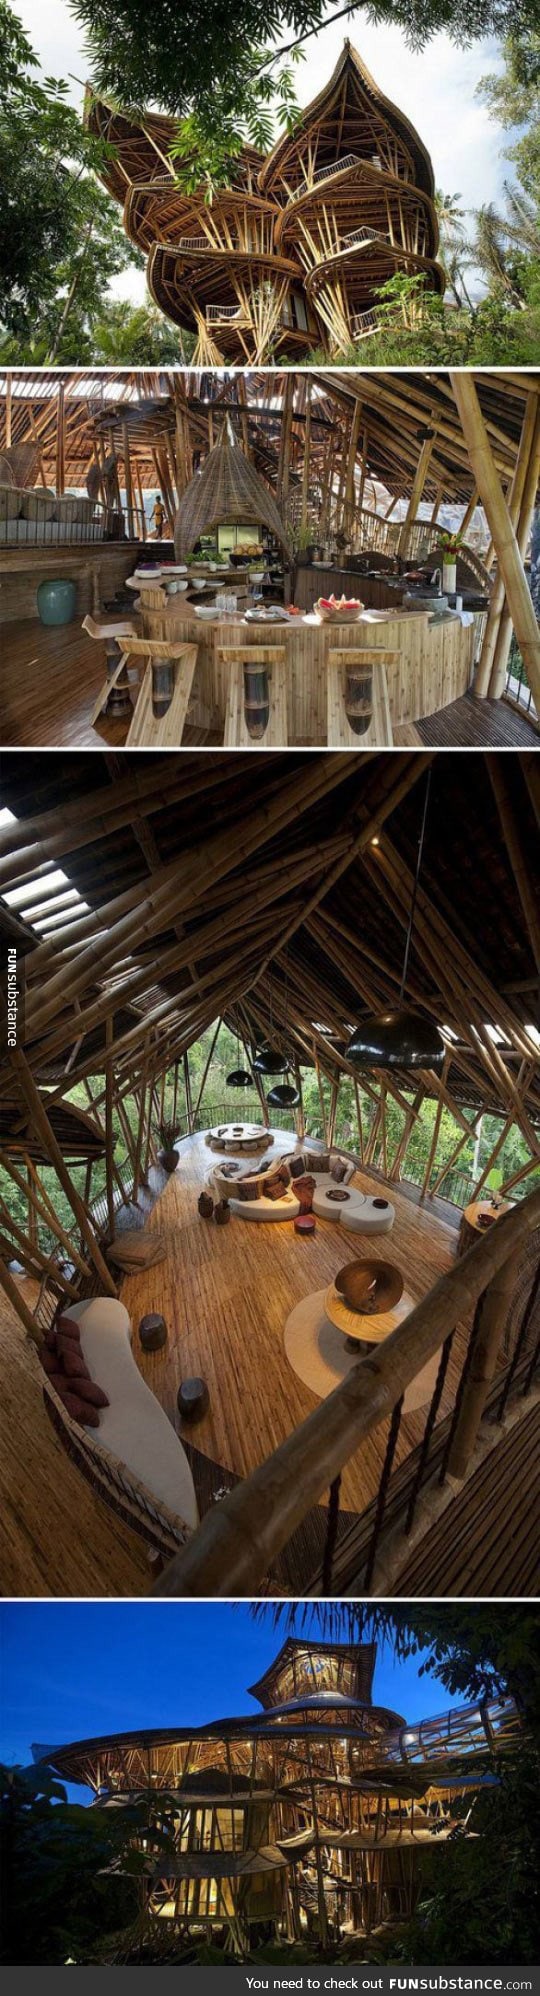 Perfect place for a vacation in the middle of a forest